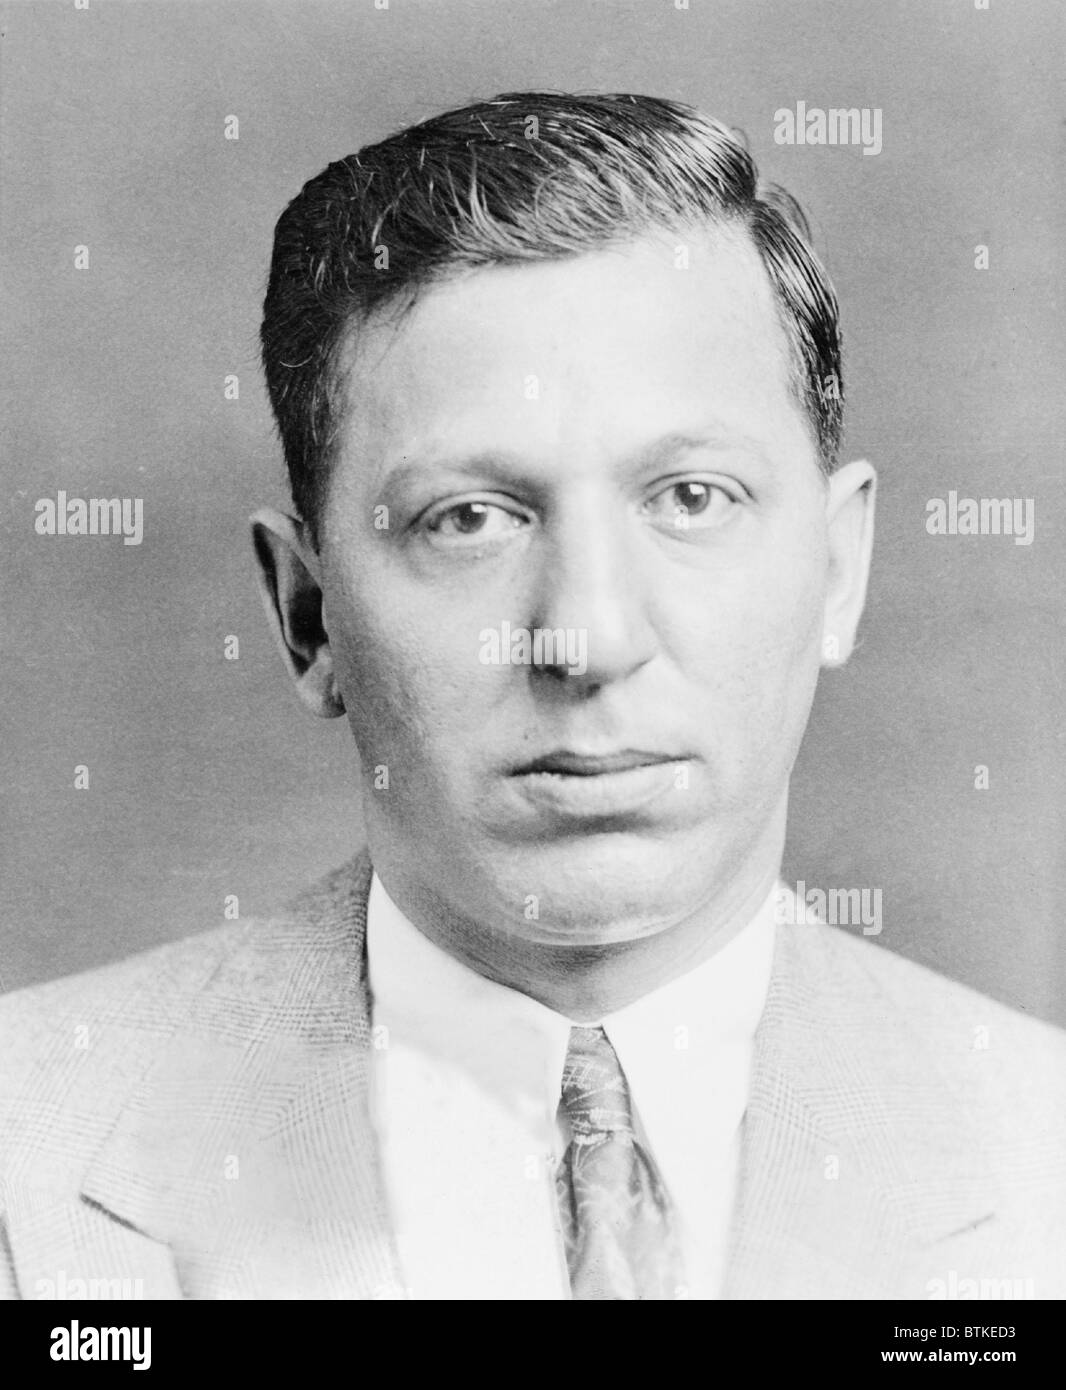 Louis 'Lepke' Buchalter (1897-1944) in 1933, when he was a crime boss in labor rackets and extortion, and would soon expand into killing for hire, in what was later called, Murder, Inc. Stock Photo